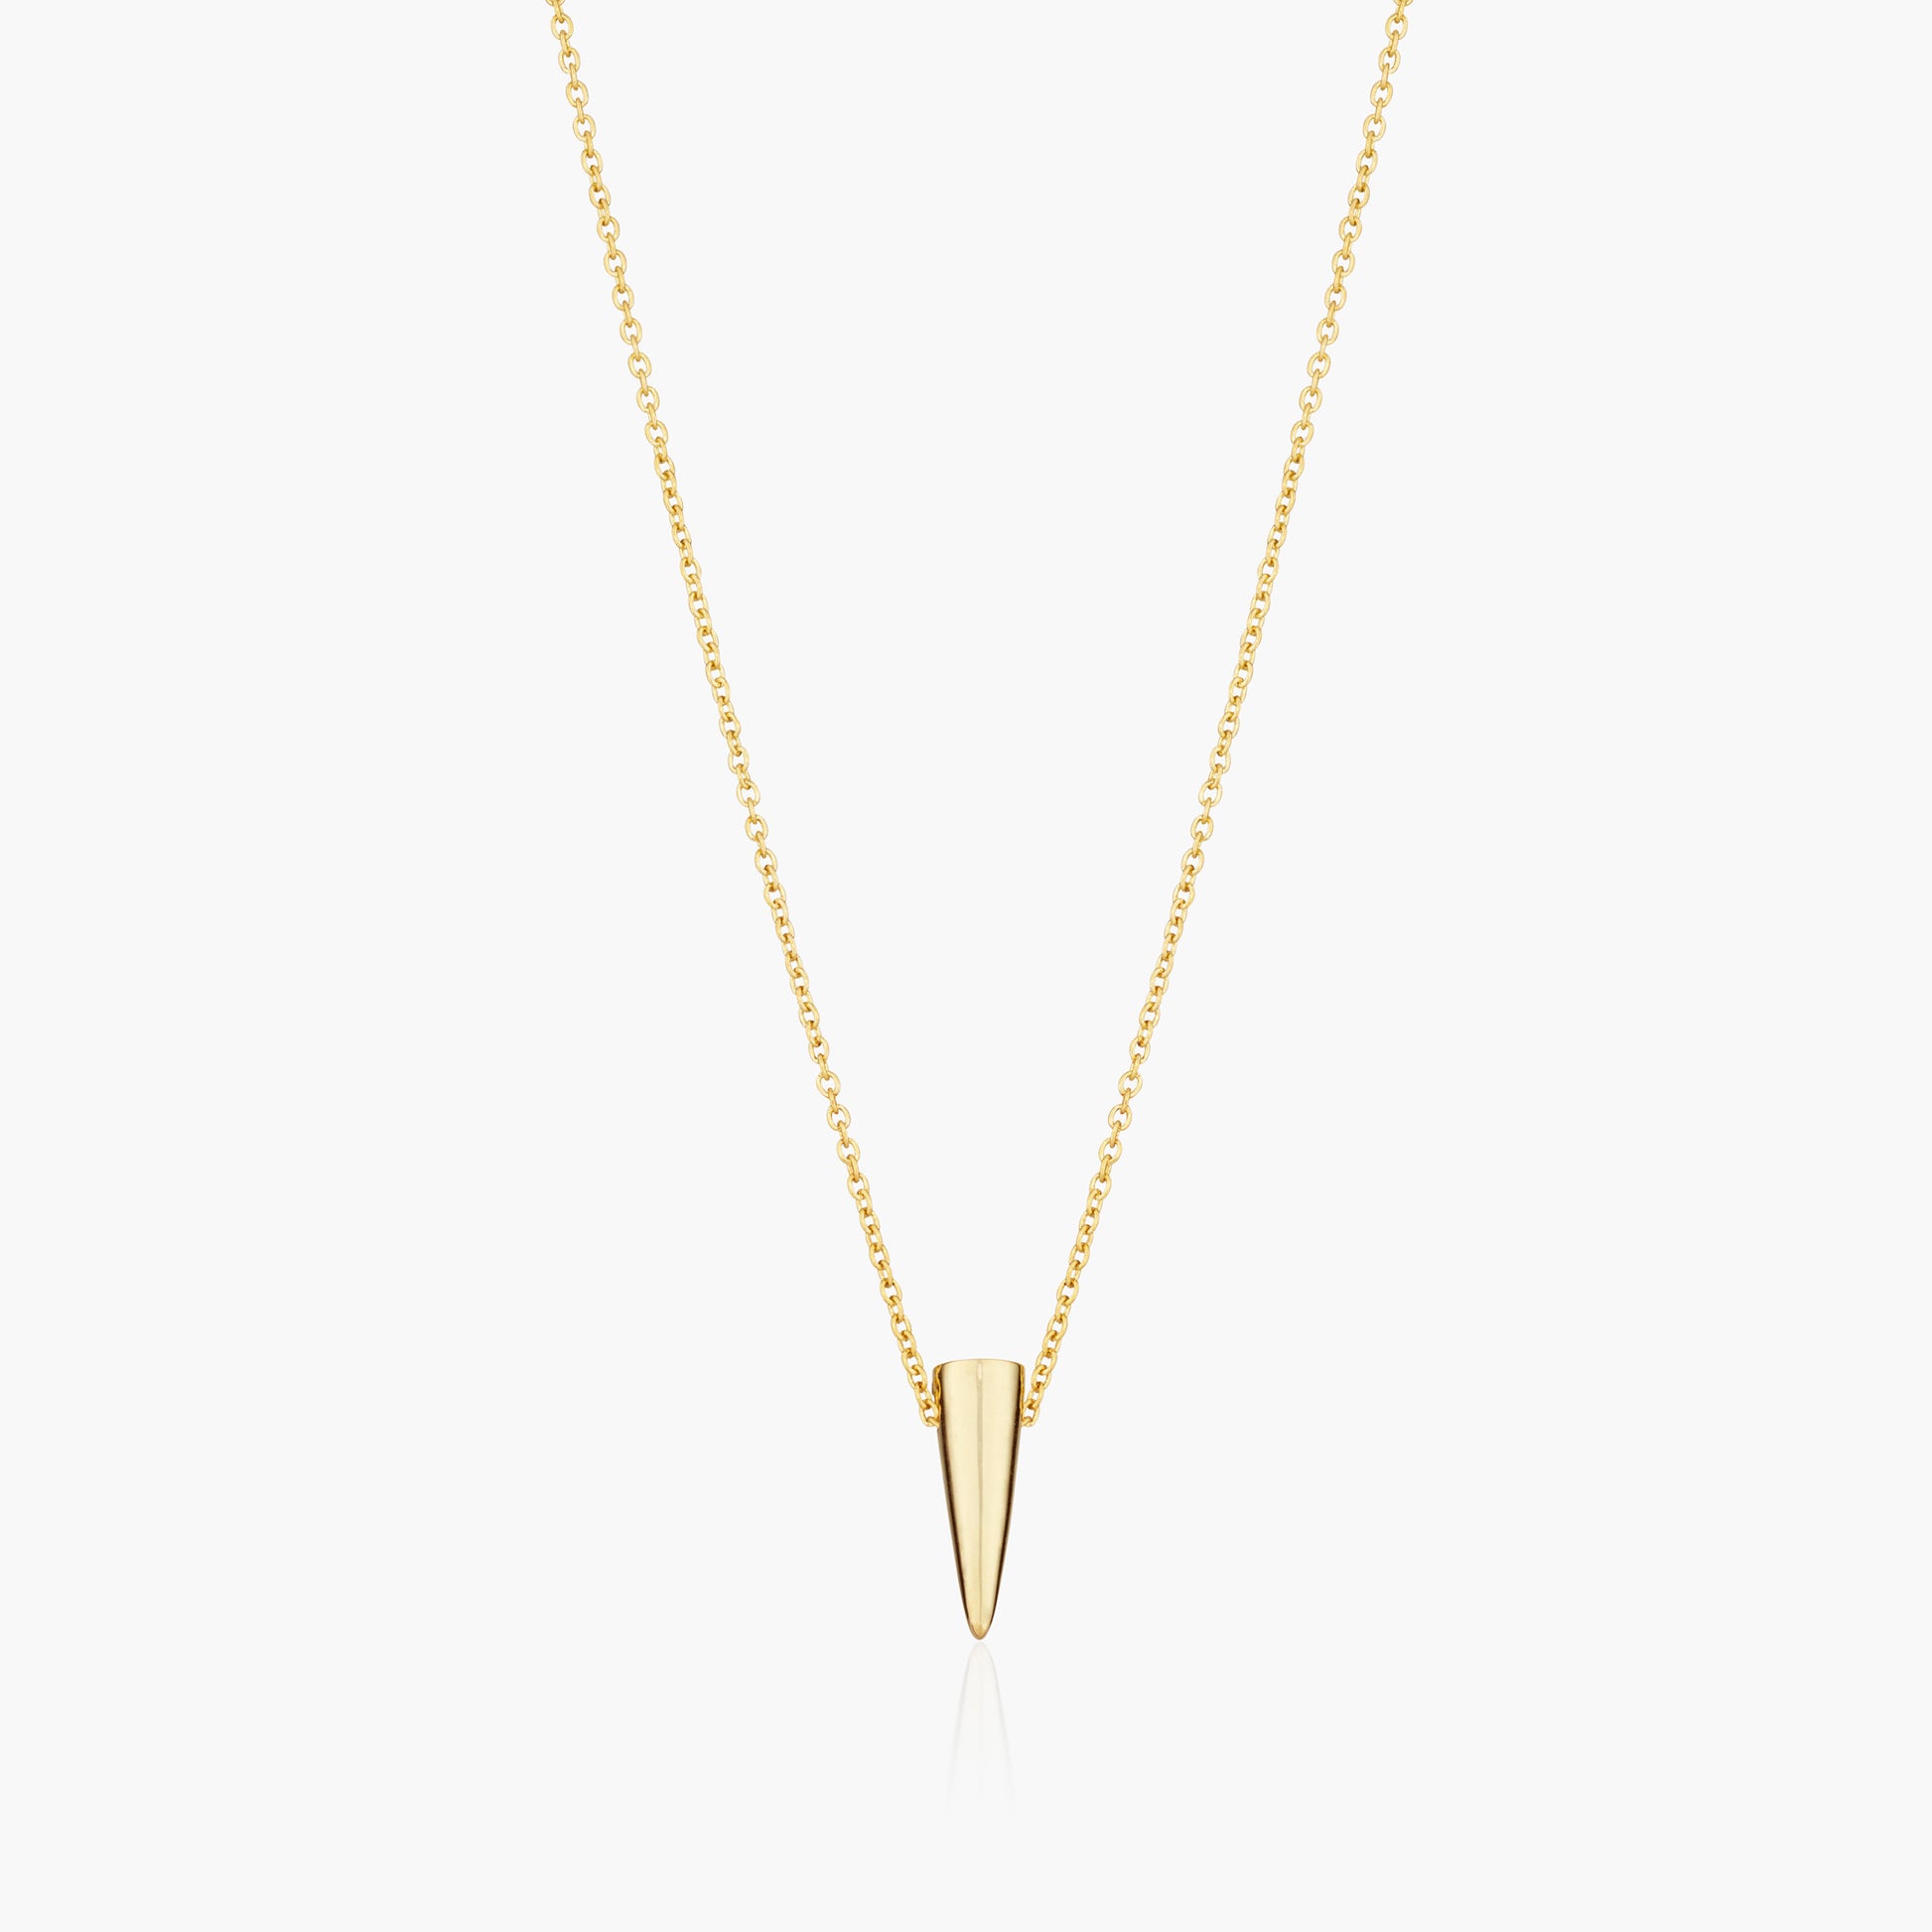 Gold Tusk necklace